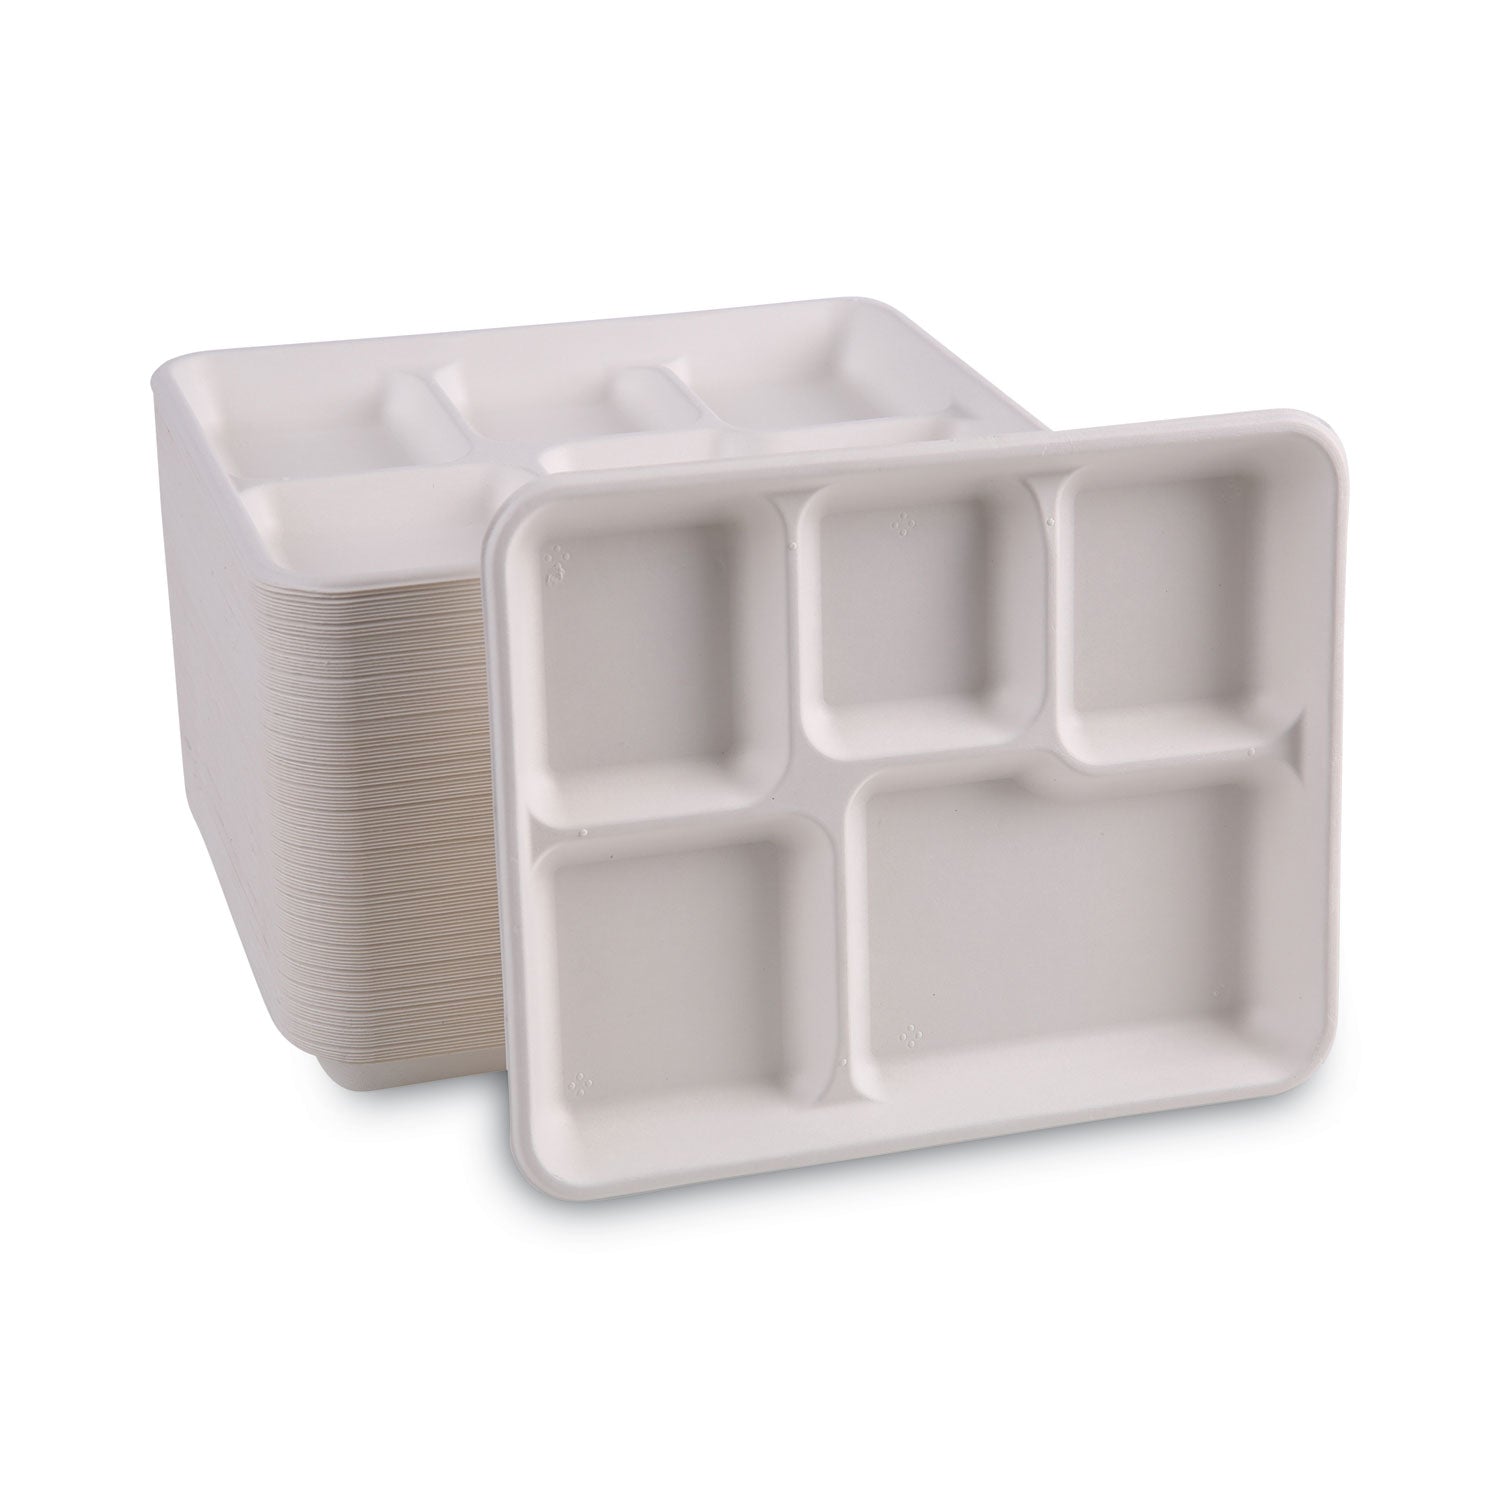 bagasse-dinnerware-5-compartment-tray-10-x-8-white-500-carton_bwktraywf128 - 5